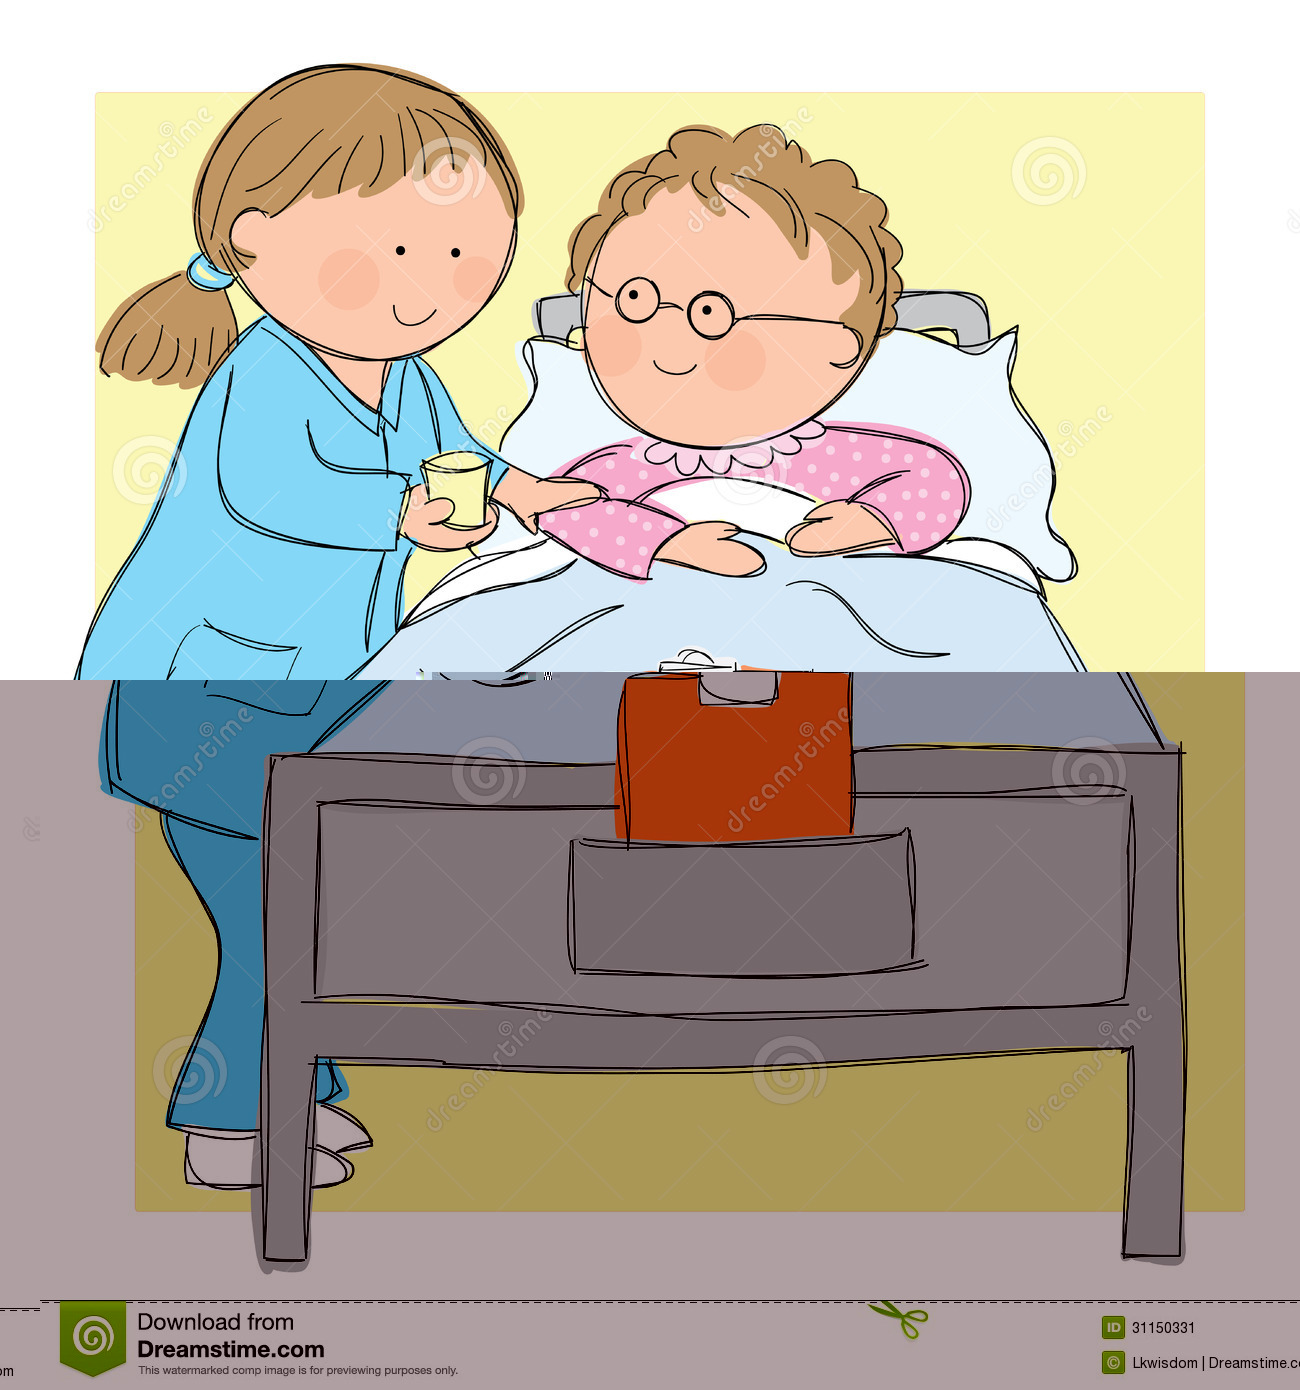 caring clipart